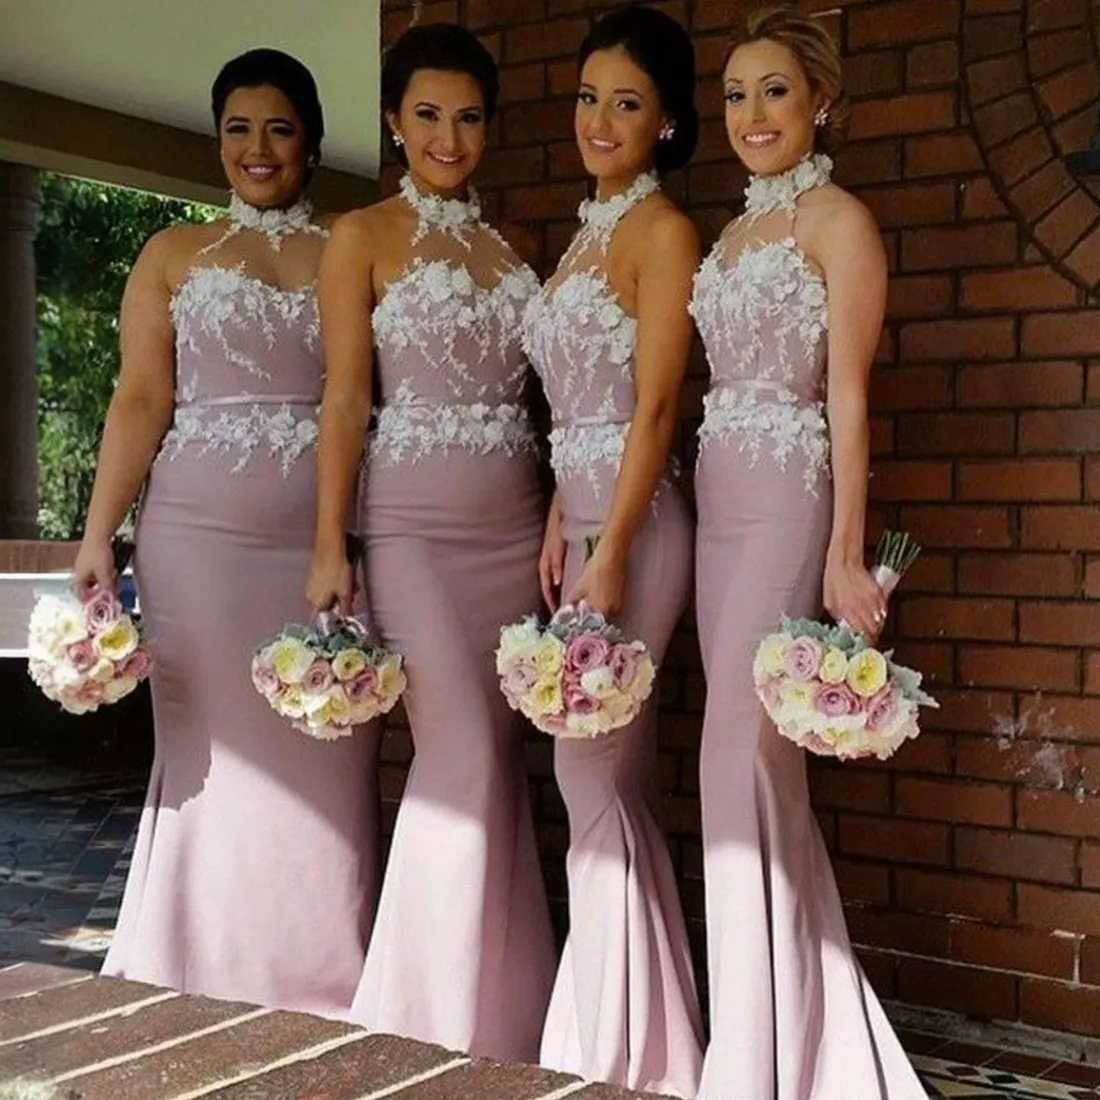 Dusty Rose Bridesmaid Dresses Mermaid Halter Appliqued Lace With Belt Maid Of Honor Elastic Satin Bride Gowns For African Black Women Girls Marriage Br084 407